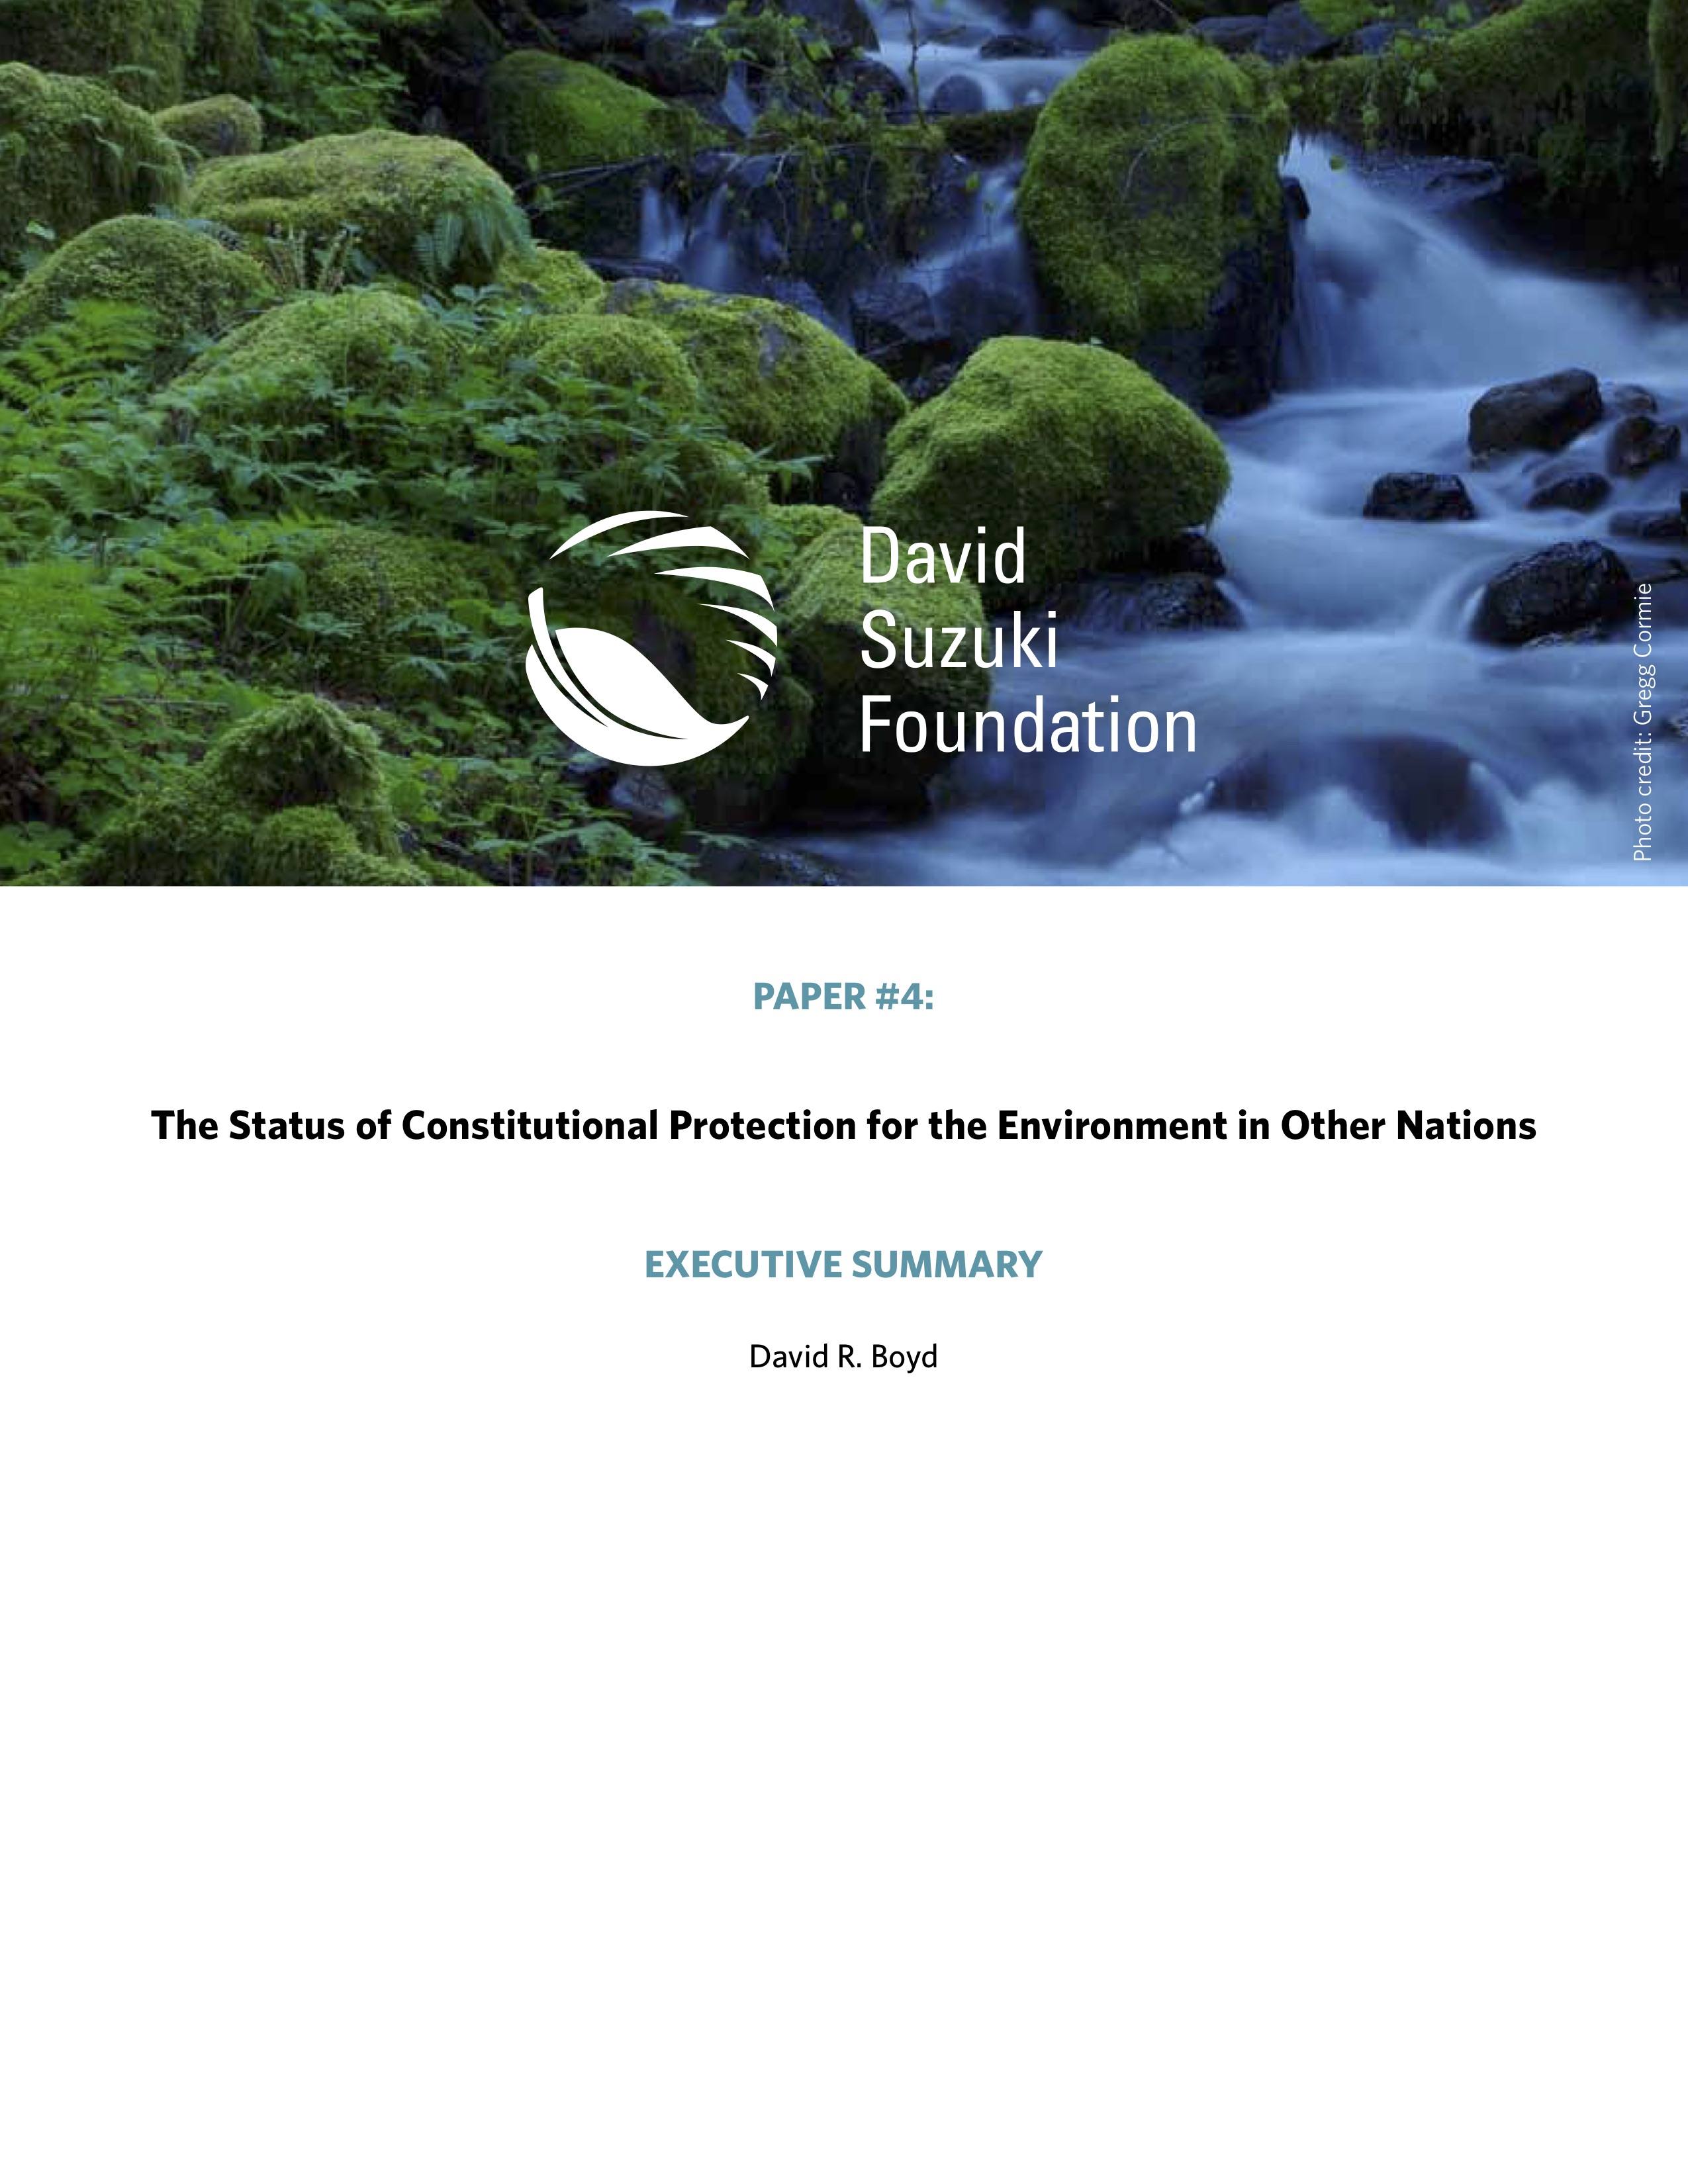 EXECUTIVE SUMMARY — The Status of Constitutional Protection for the Environment in Other Nations